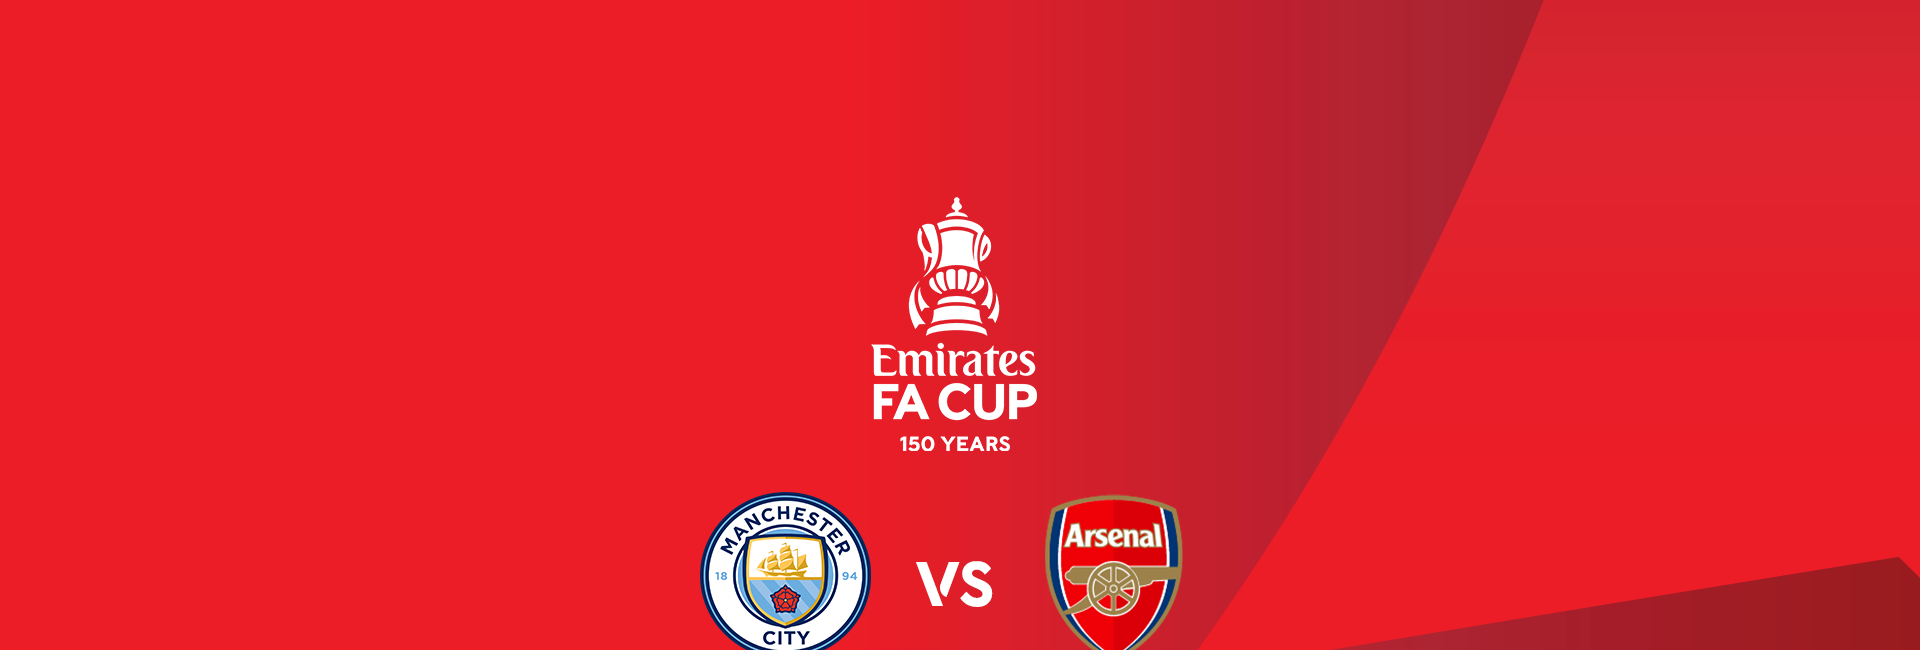 FA Cup: Manchester City - Arsenal